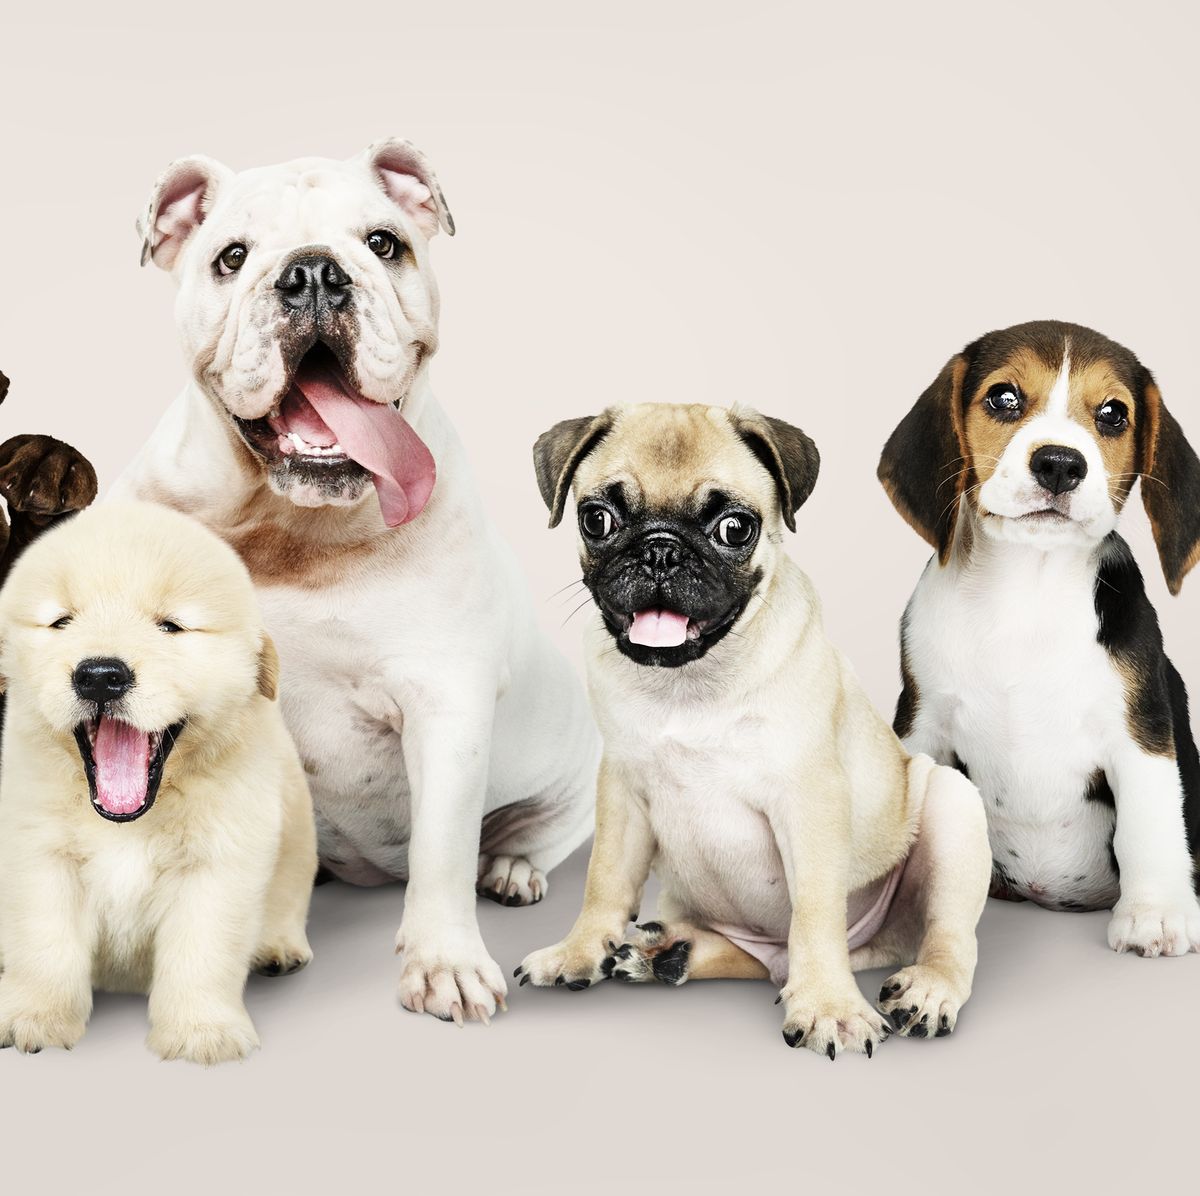 https://hips.hearstapps.com/hmg-prod/images/group-portrait-of-adorable-puppies-royalty-free-image-1687451786.jpg?crop=0.503xw:1.00xh;0.433xw,0&resize=1200:*